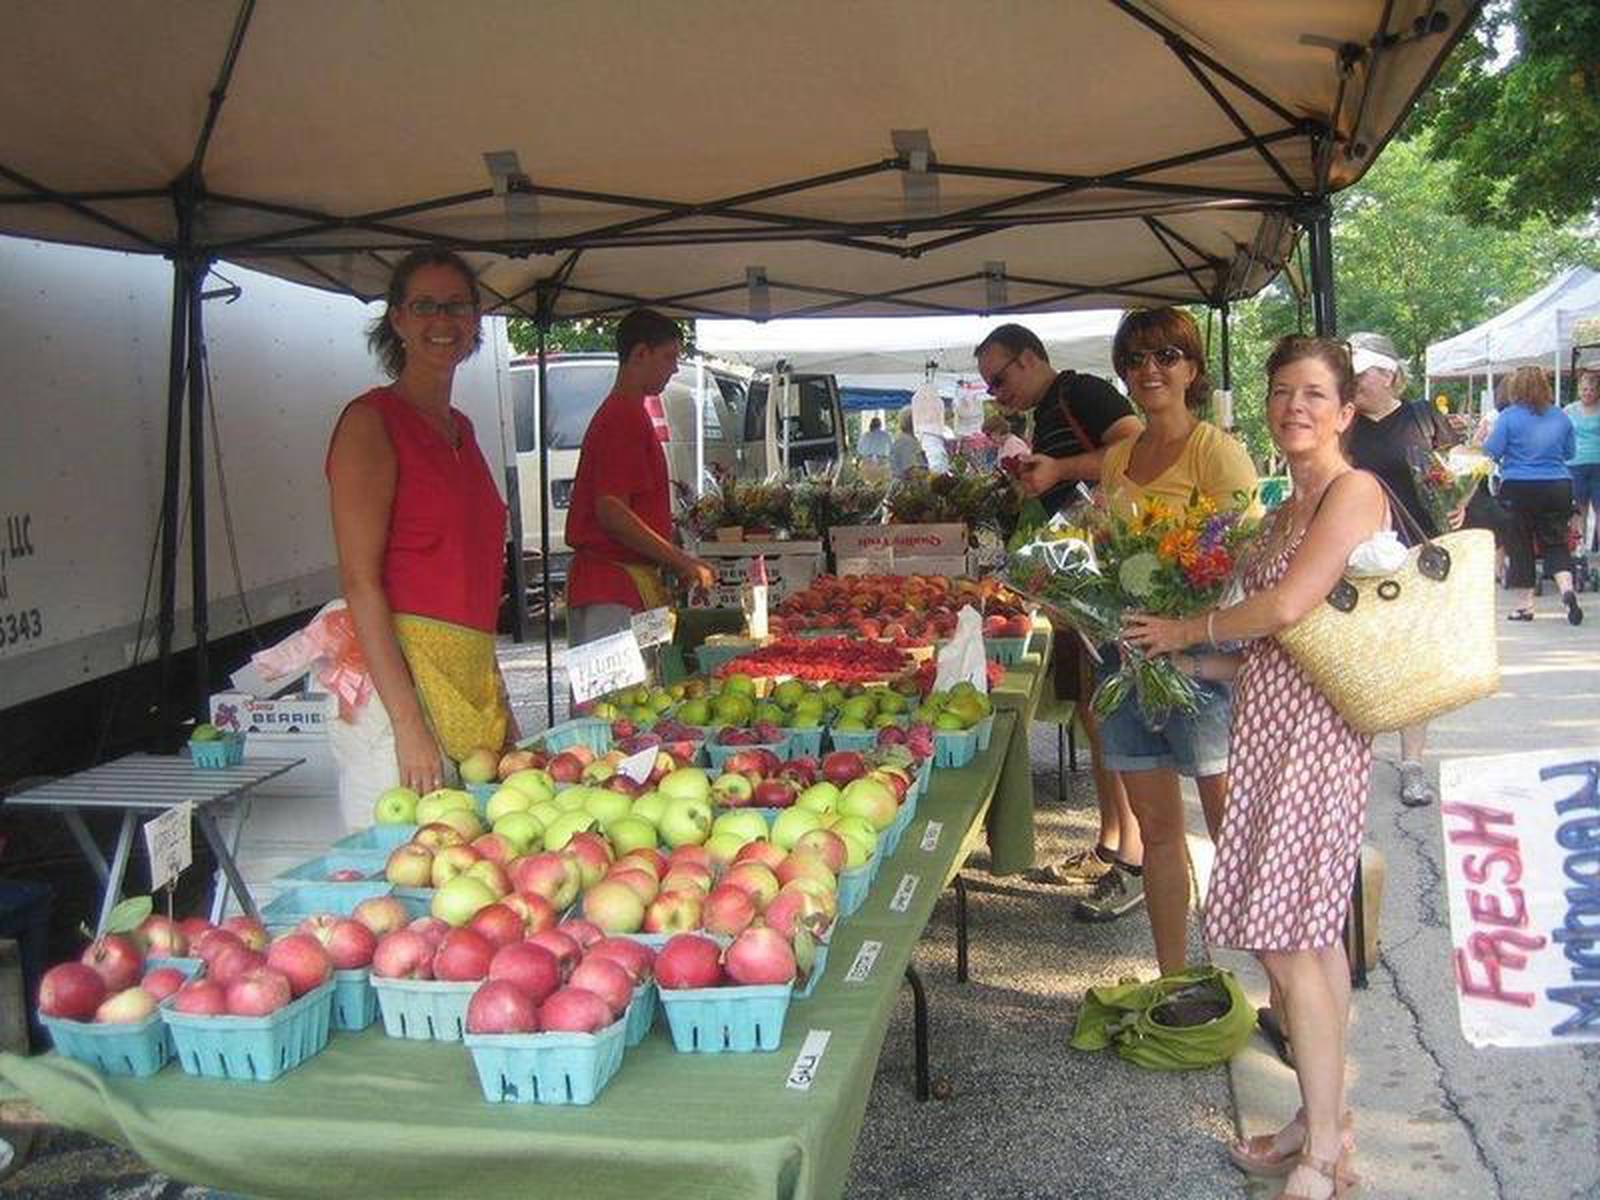 St. Charles Farmers Market to move outdoors for the season Shaw Local